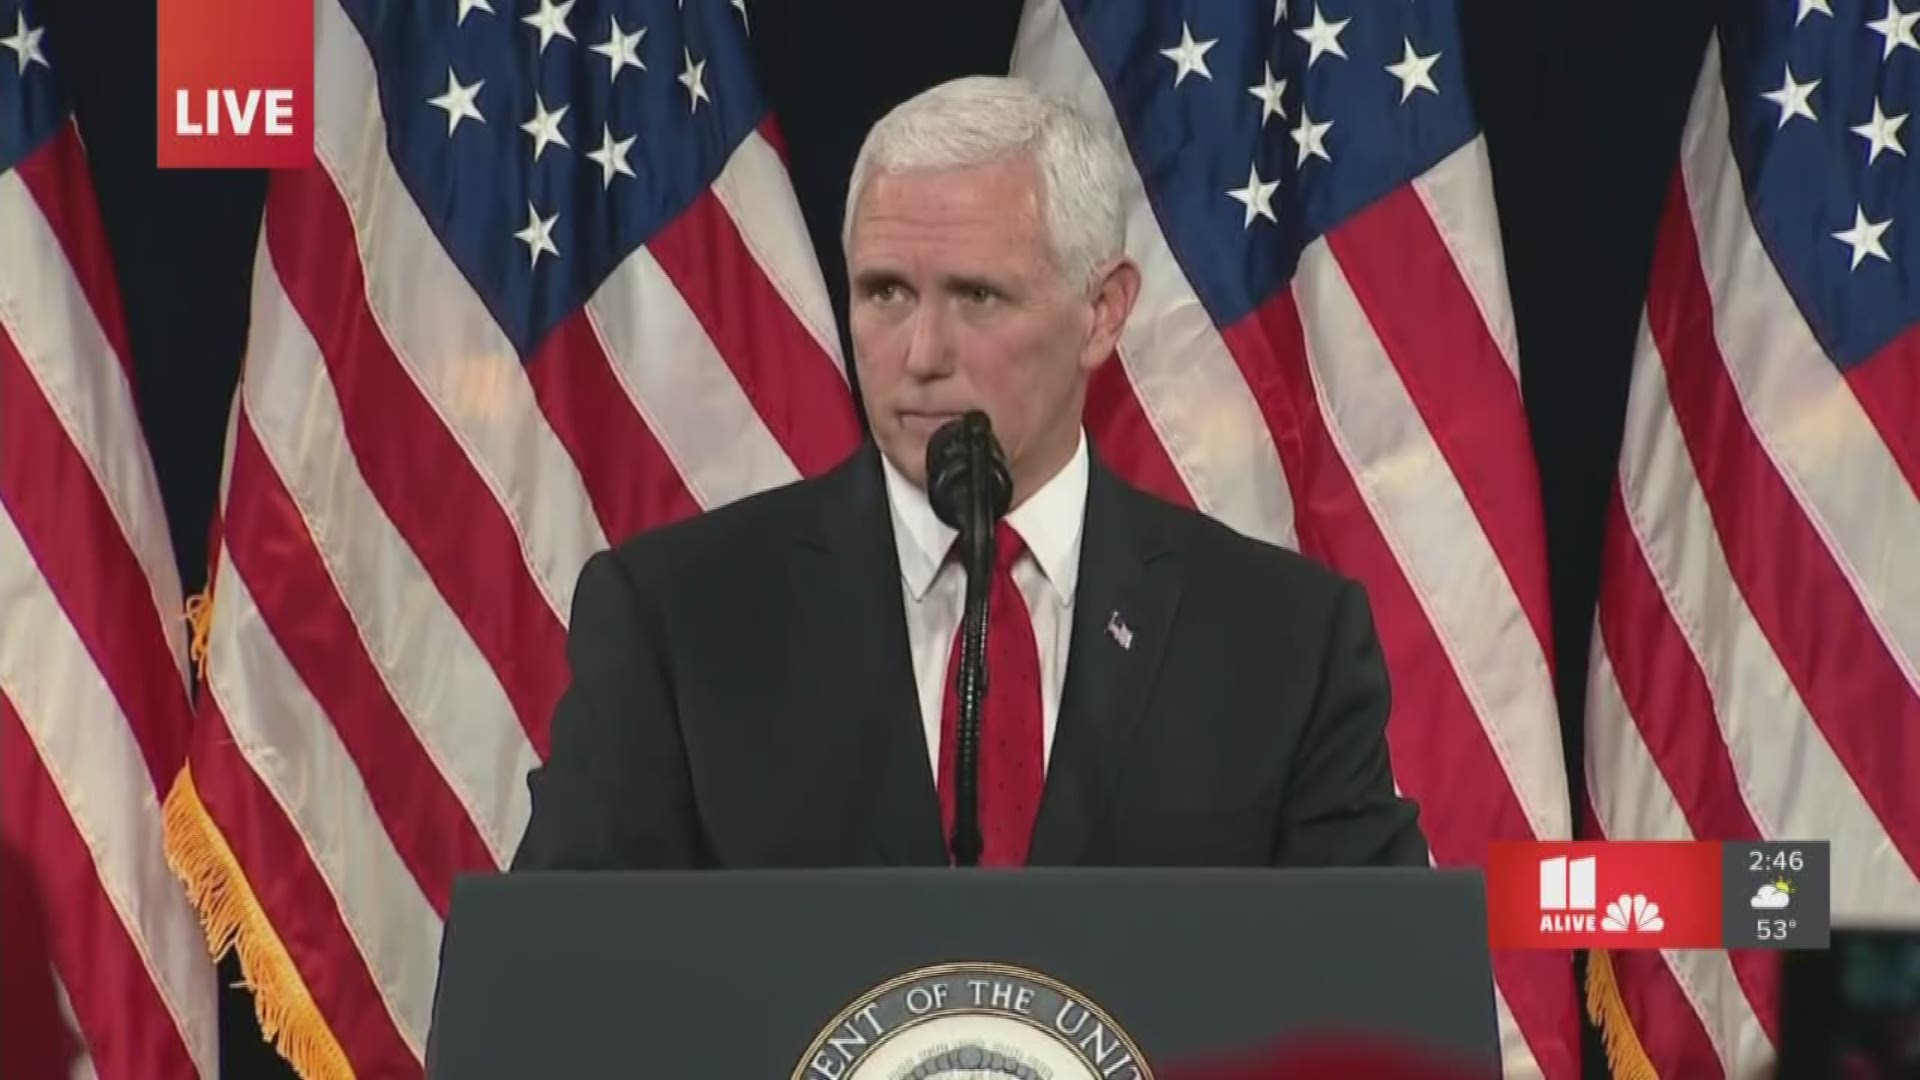 Pence spoke prior to President Donald Trump's arrival at the Georgia World Congress Center.